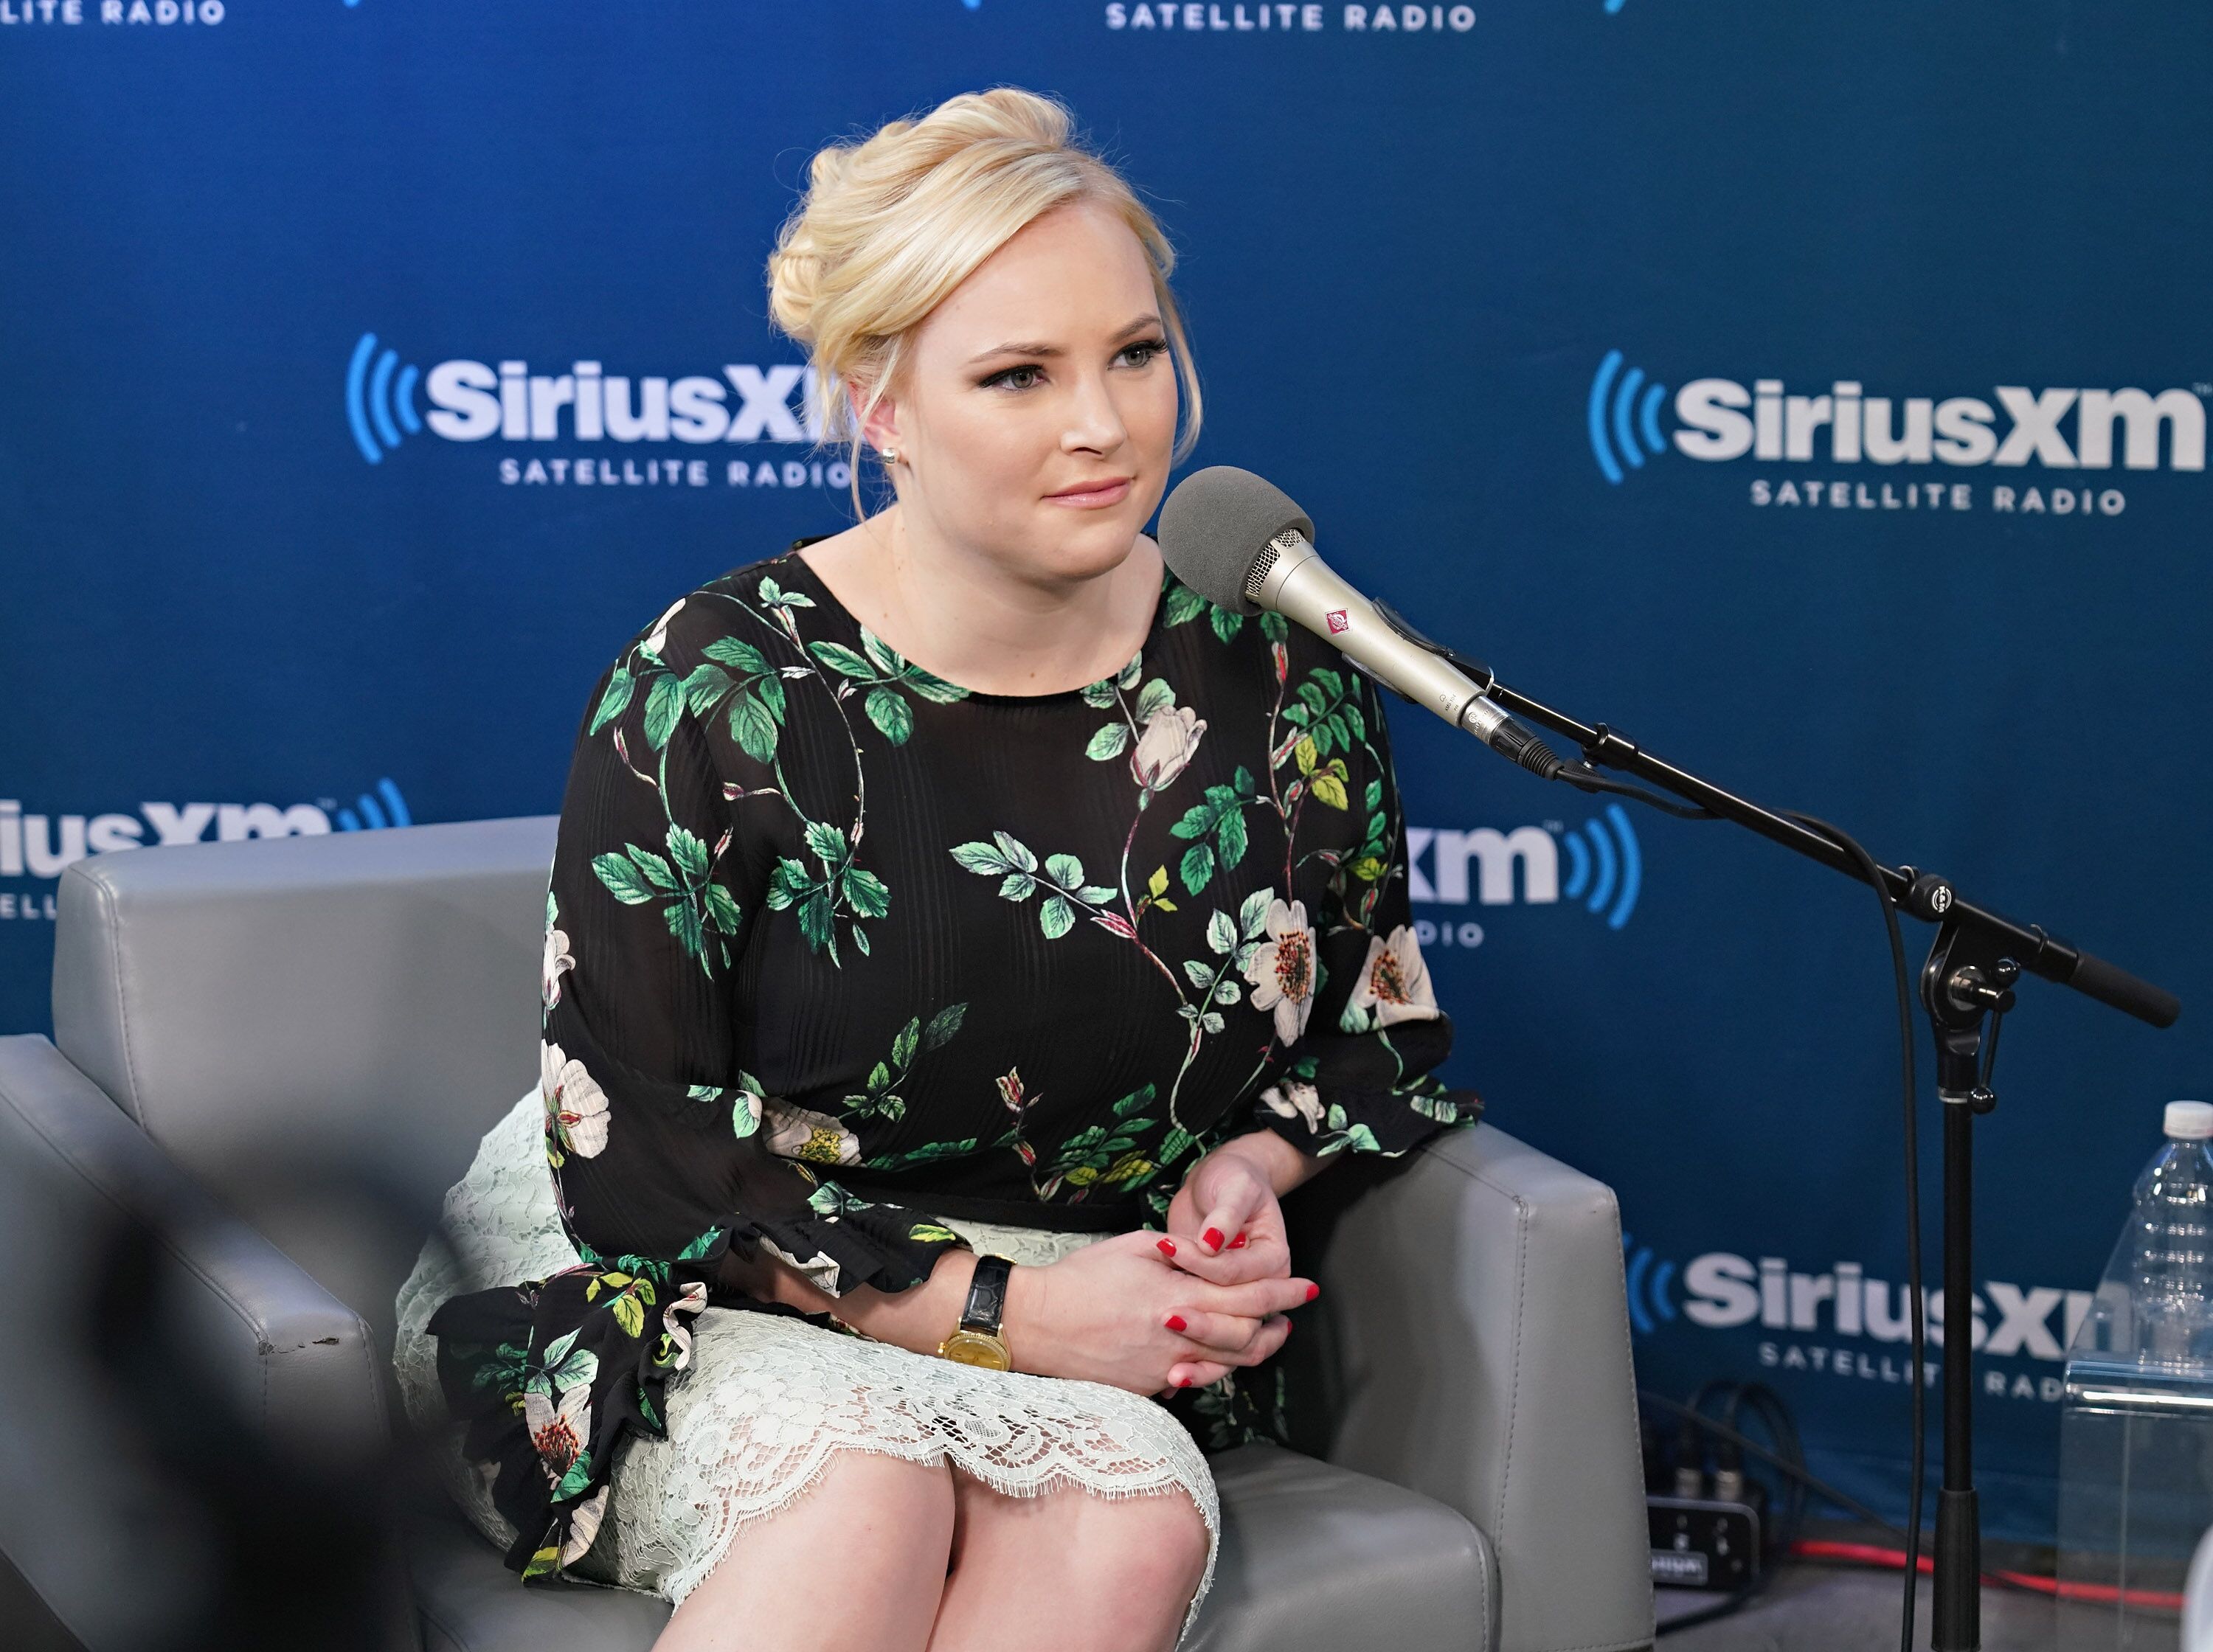 Meghan McCain at a SiriusXM event on February 5, 2018, in New York City | Photo: Cindy Ord/Getty Images